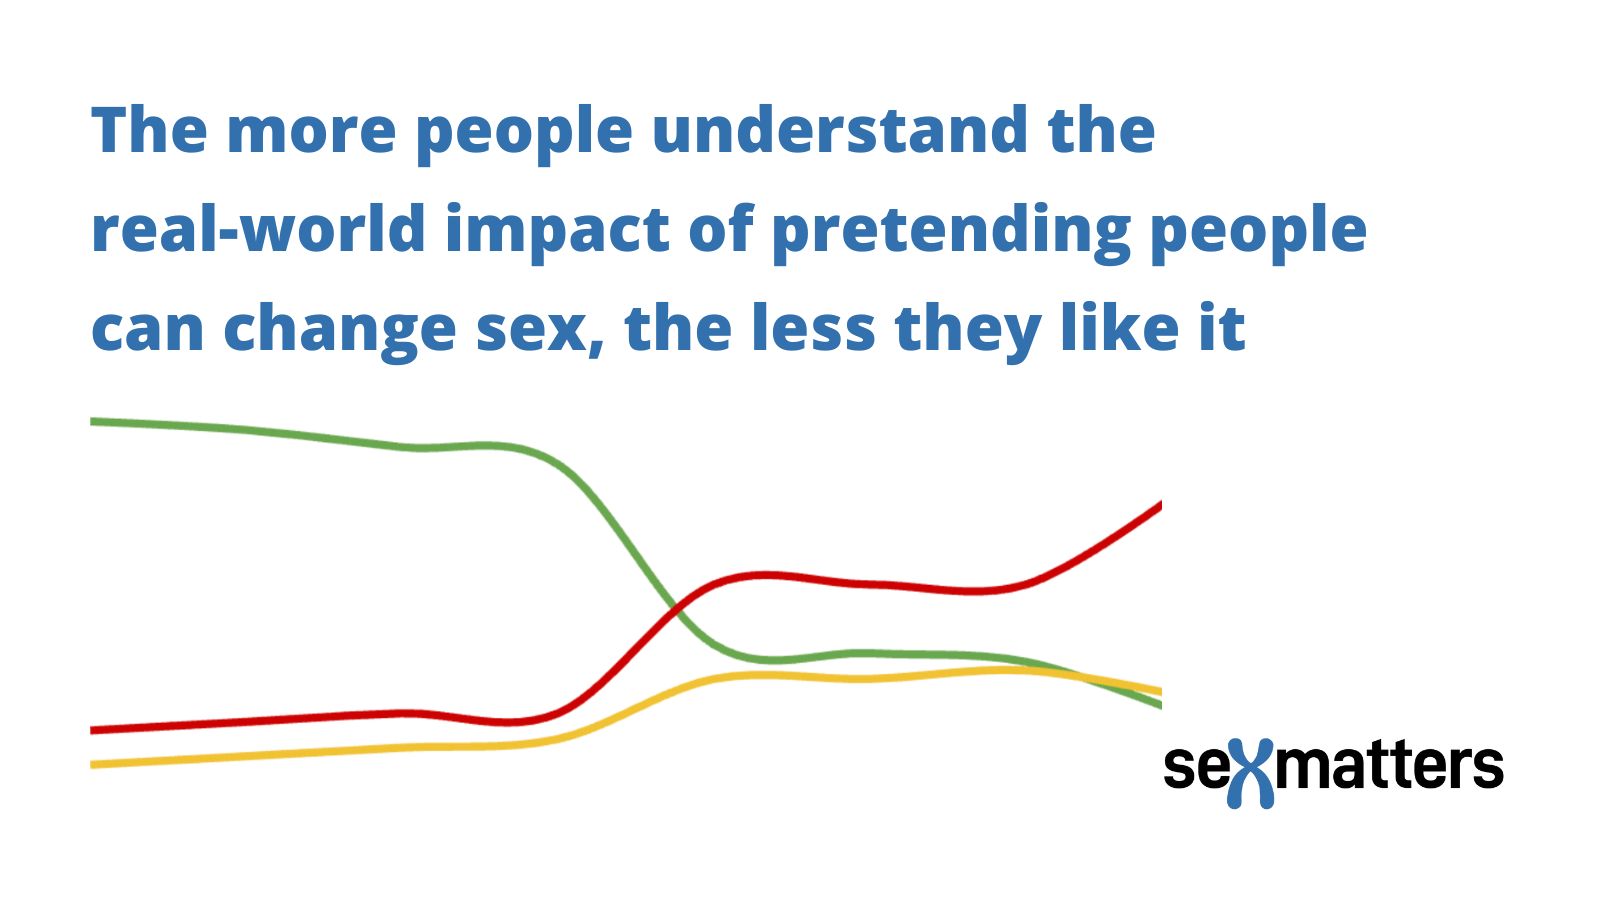 The more people understand the real-world impact of pretending people can change sex, the less they like it